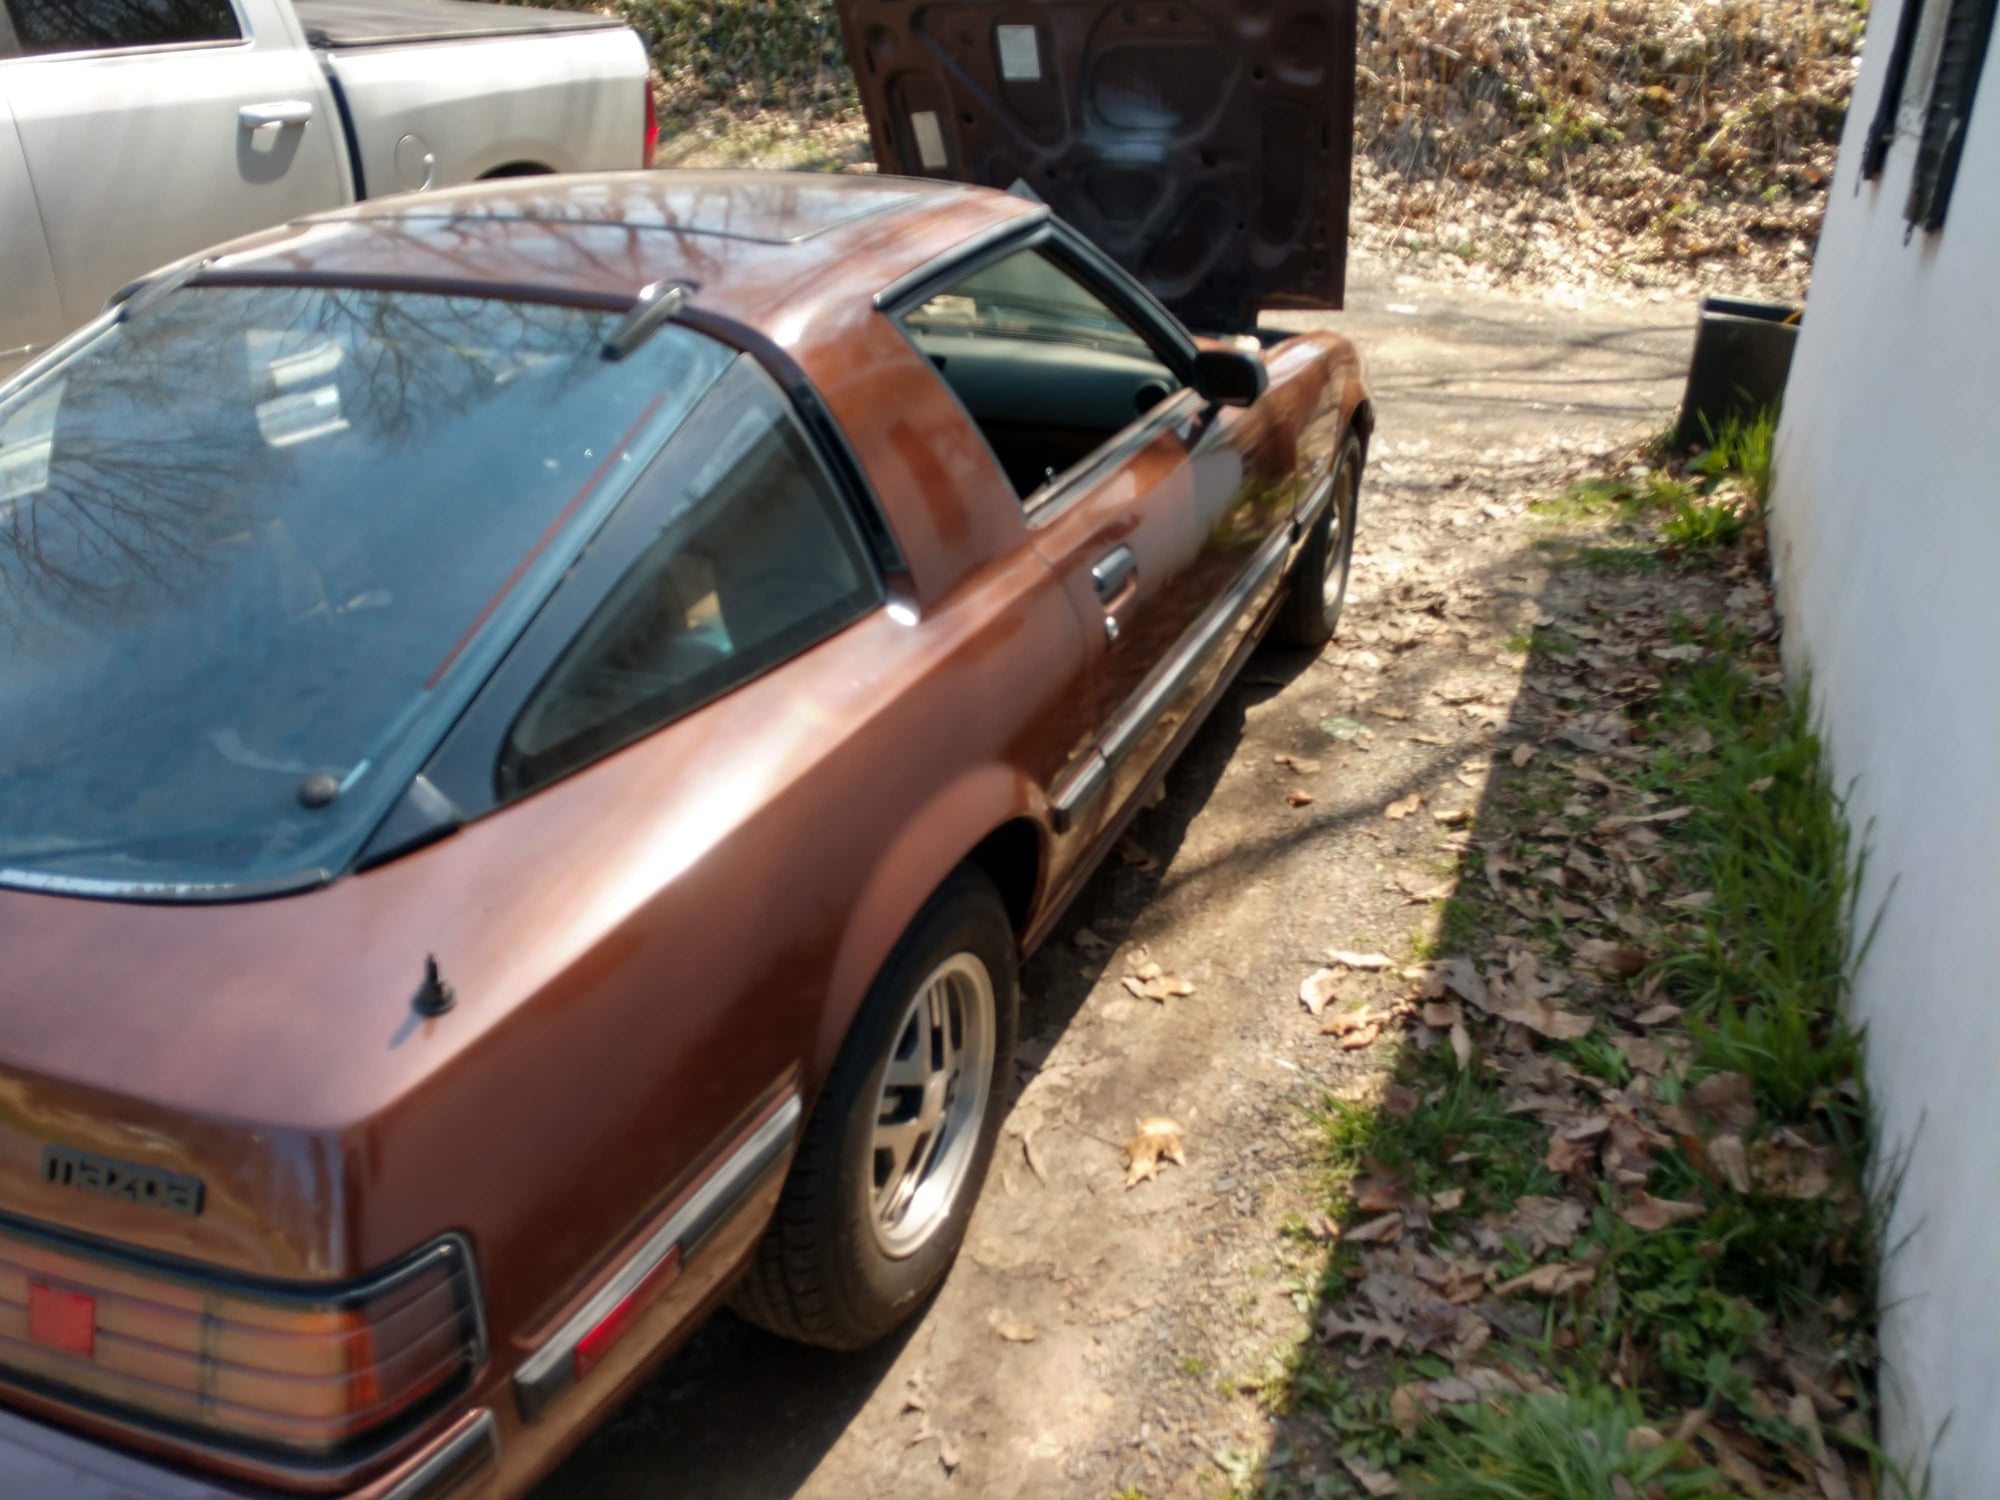 1983 Mazda RX-7 - 1983 Mazda RX7 - Used - VIN JM1FB3313D0739928 - 111,656 Miles - Other - 2WD - Coupe - Brown - Bloomsburg, PA 17815, United States